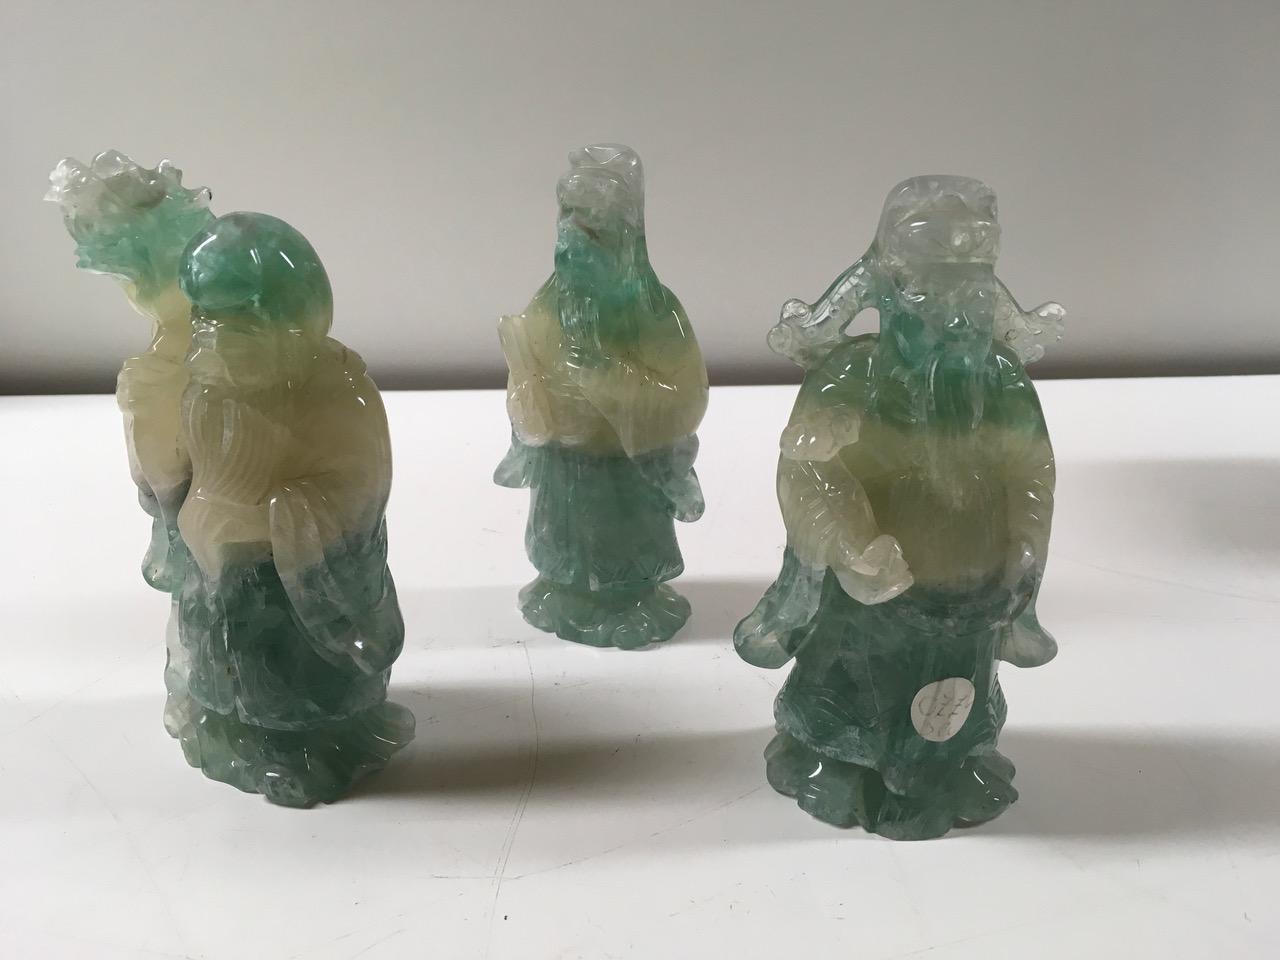 A beautiful sculptures in stone of Fluorite produced in China. Fluorite is a mineral composed of calcium fluoride. Fluorite stimulates creativity and imagination.
Italian private collection.